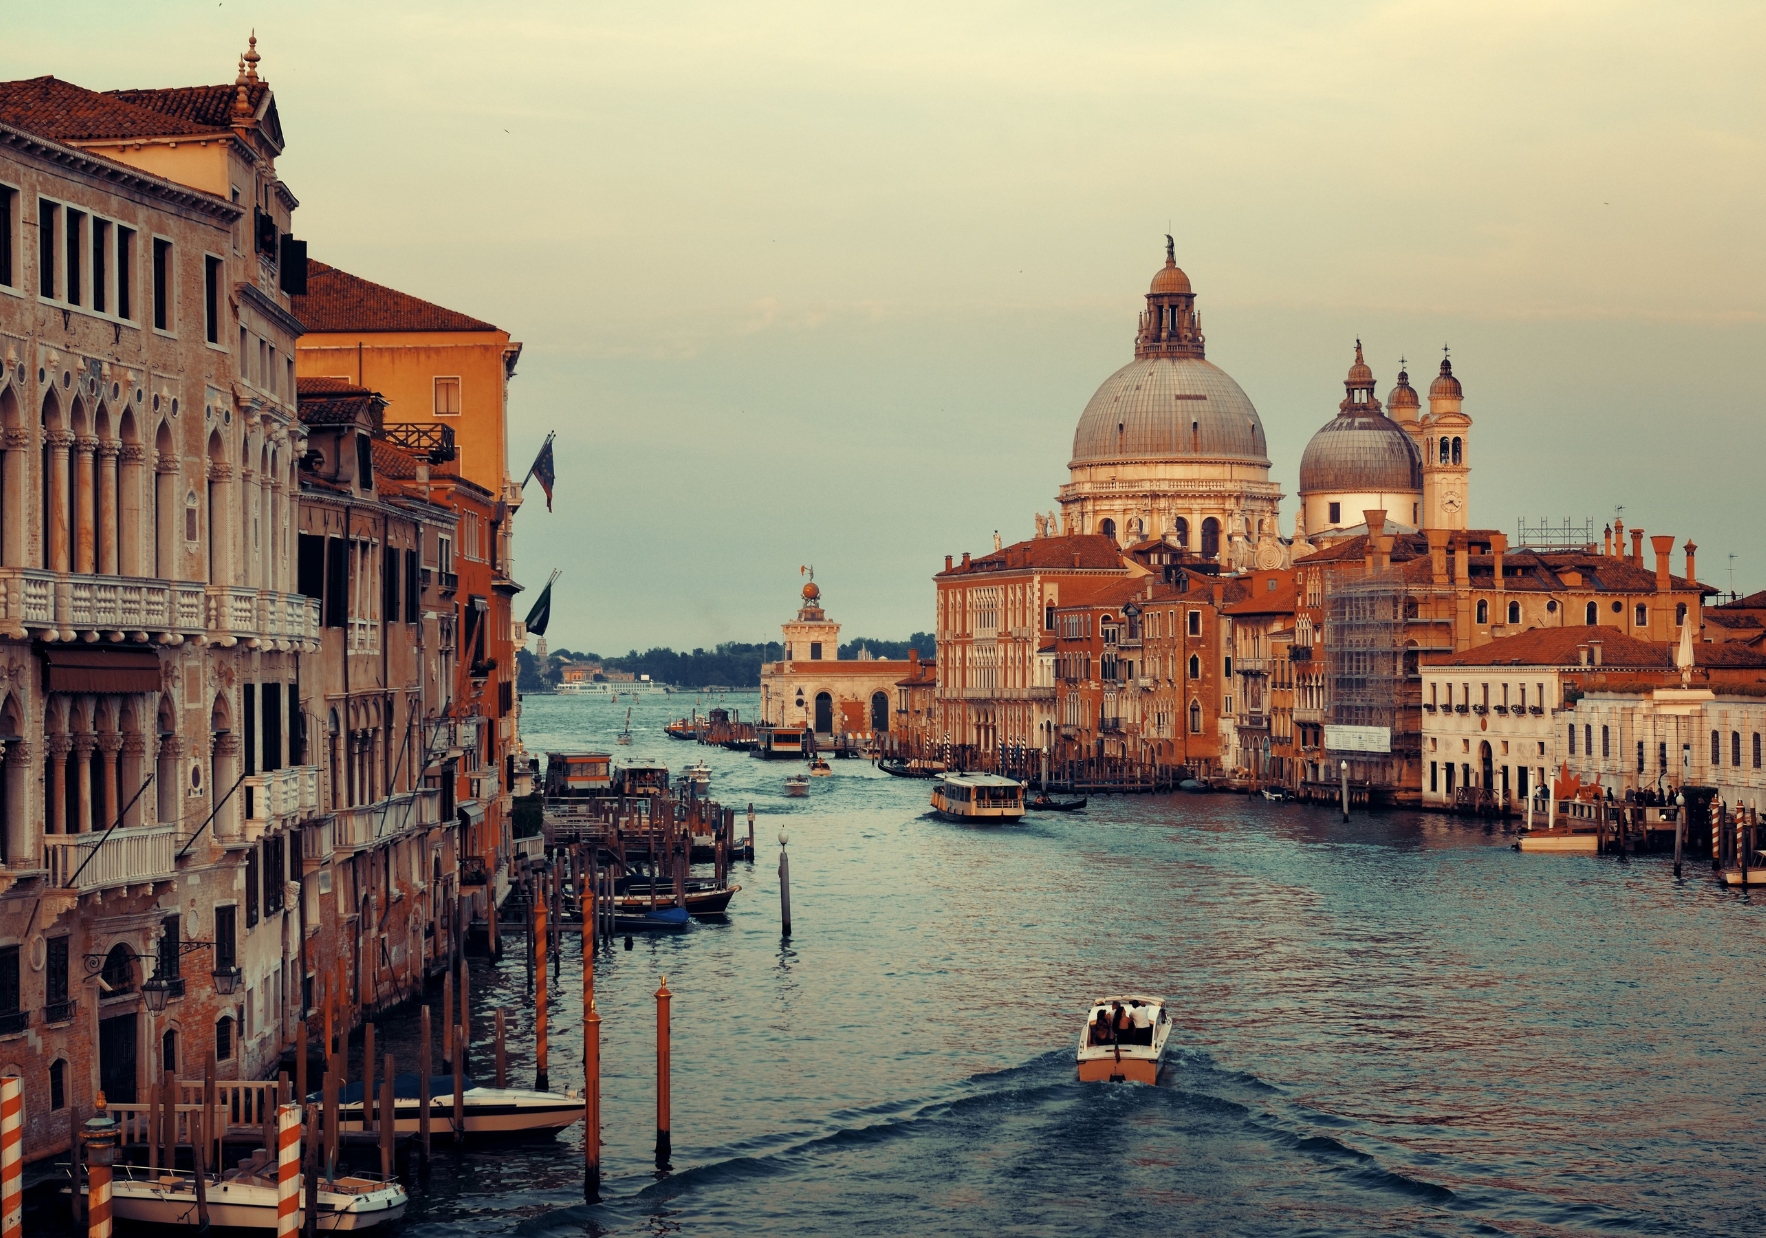 Image of the sunrise on the Grand Canal in Venice